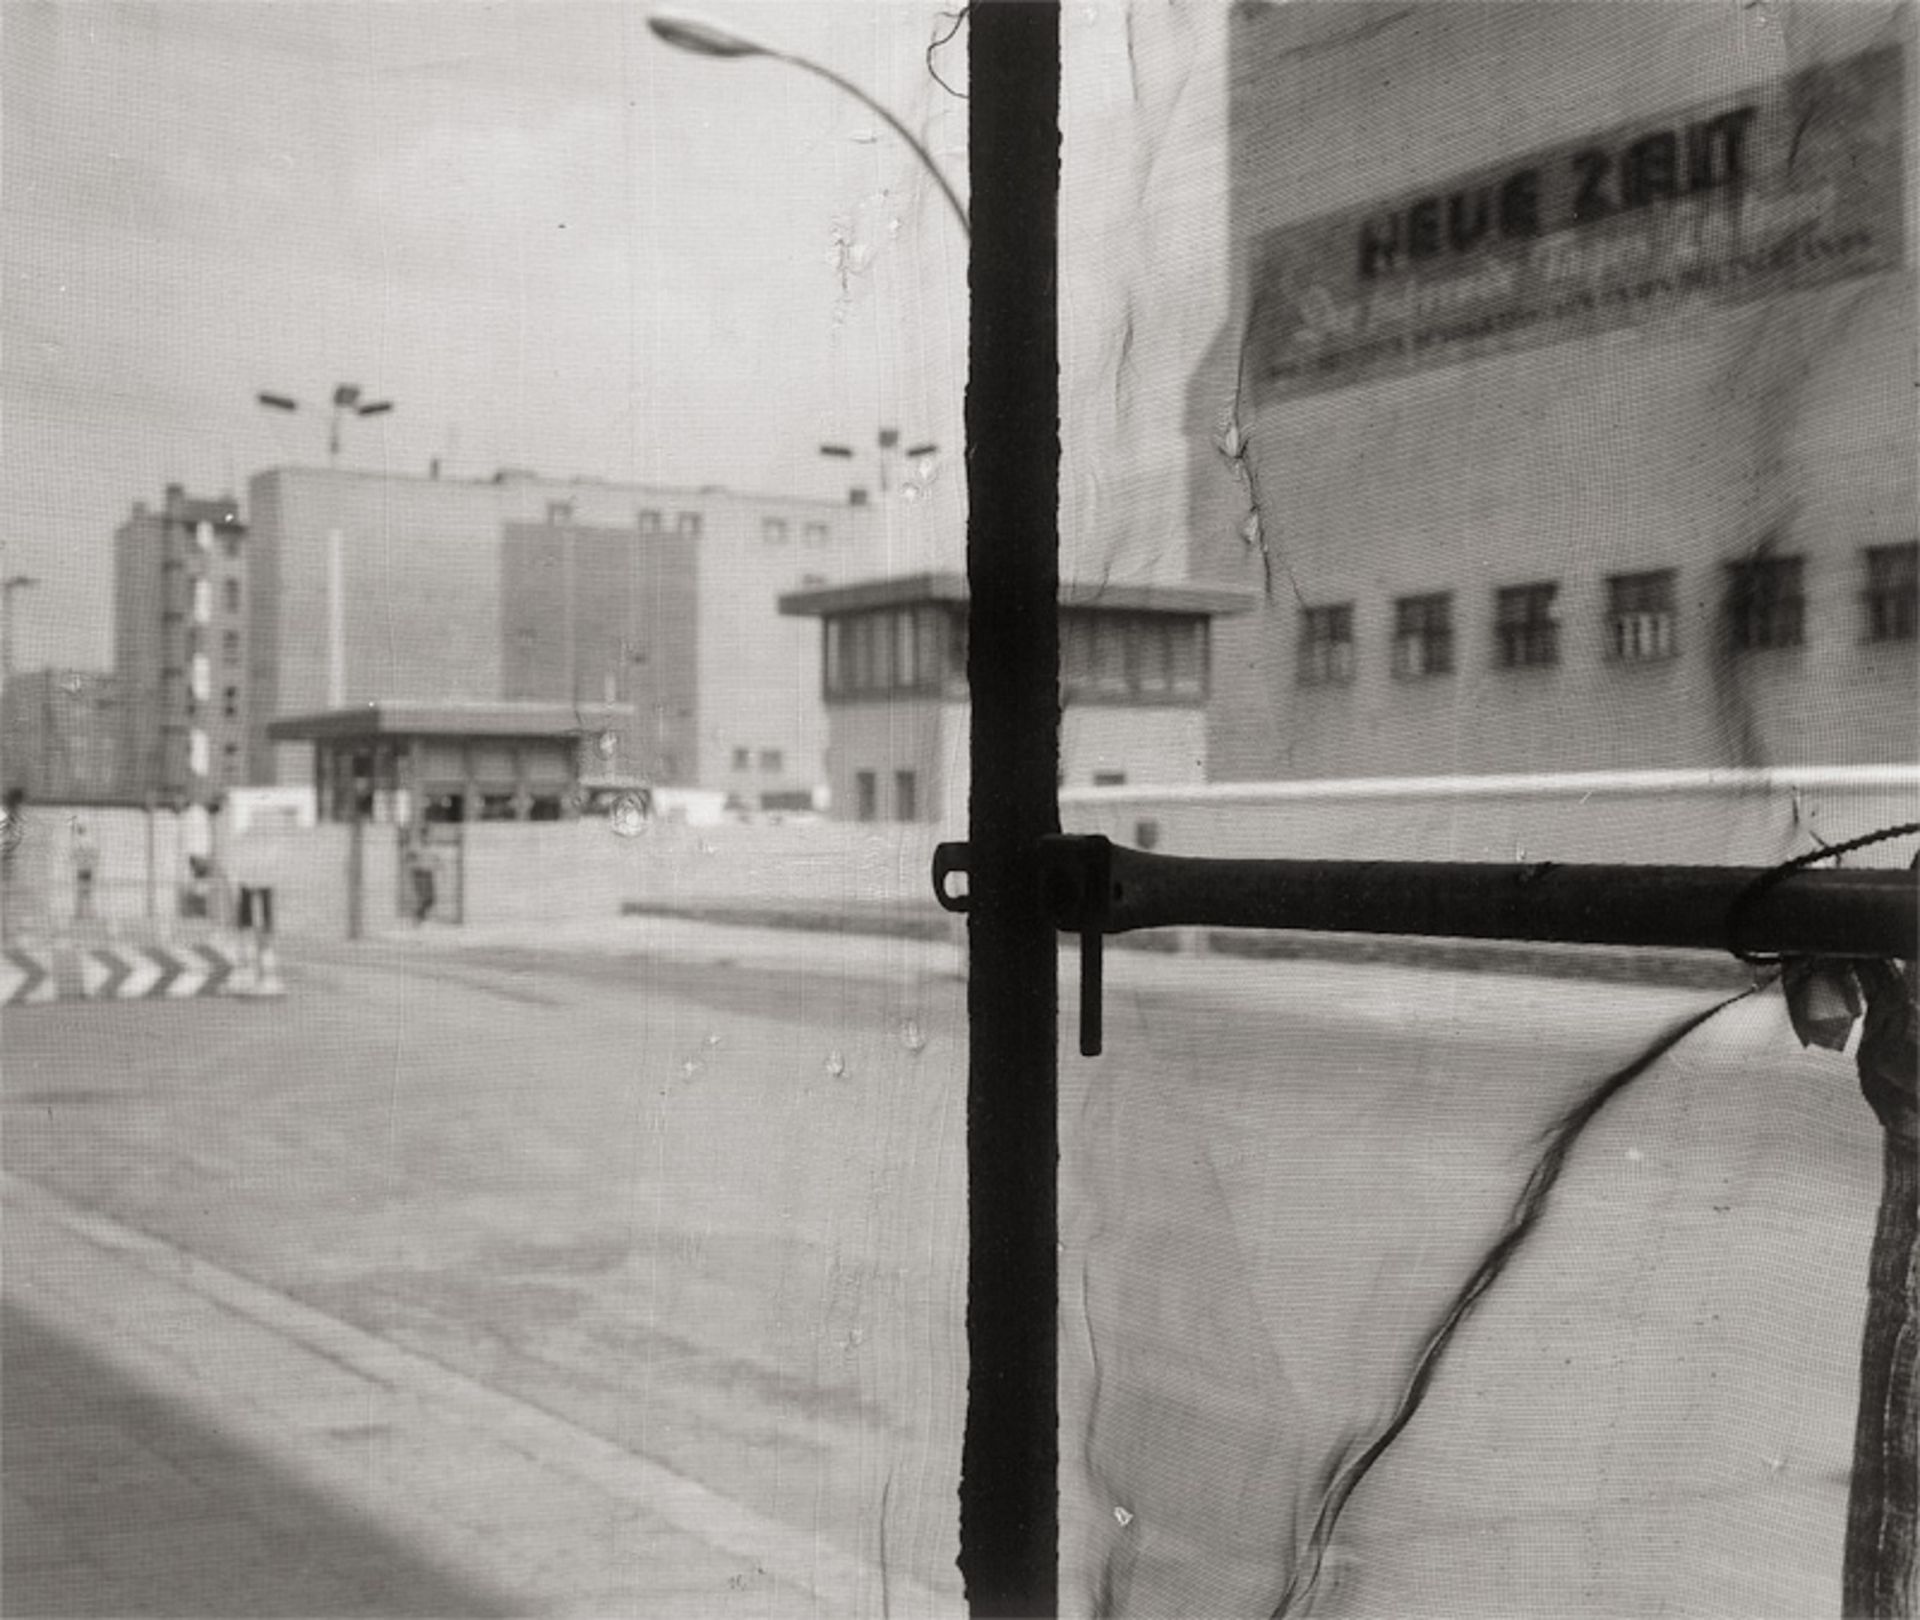 Schmidt, Michael: Image from the series "Waffenruhe" (Checkpoint Charlie)